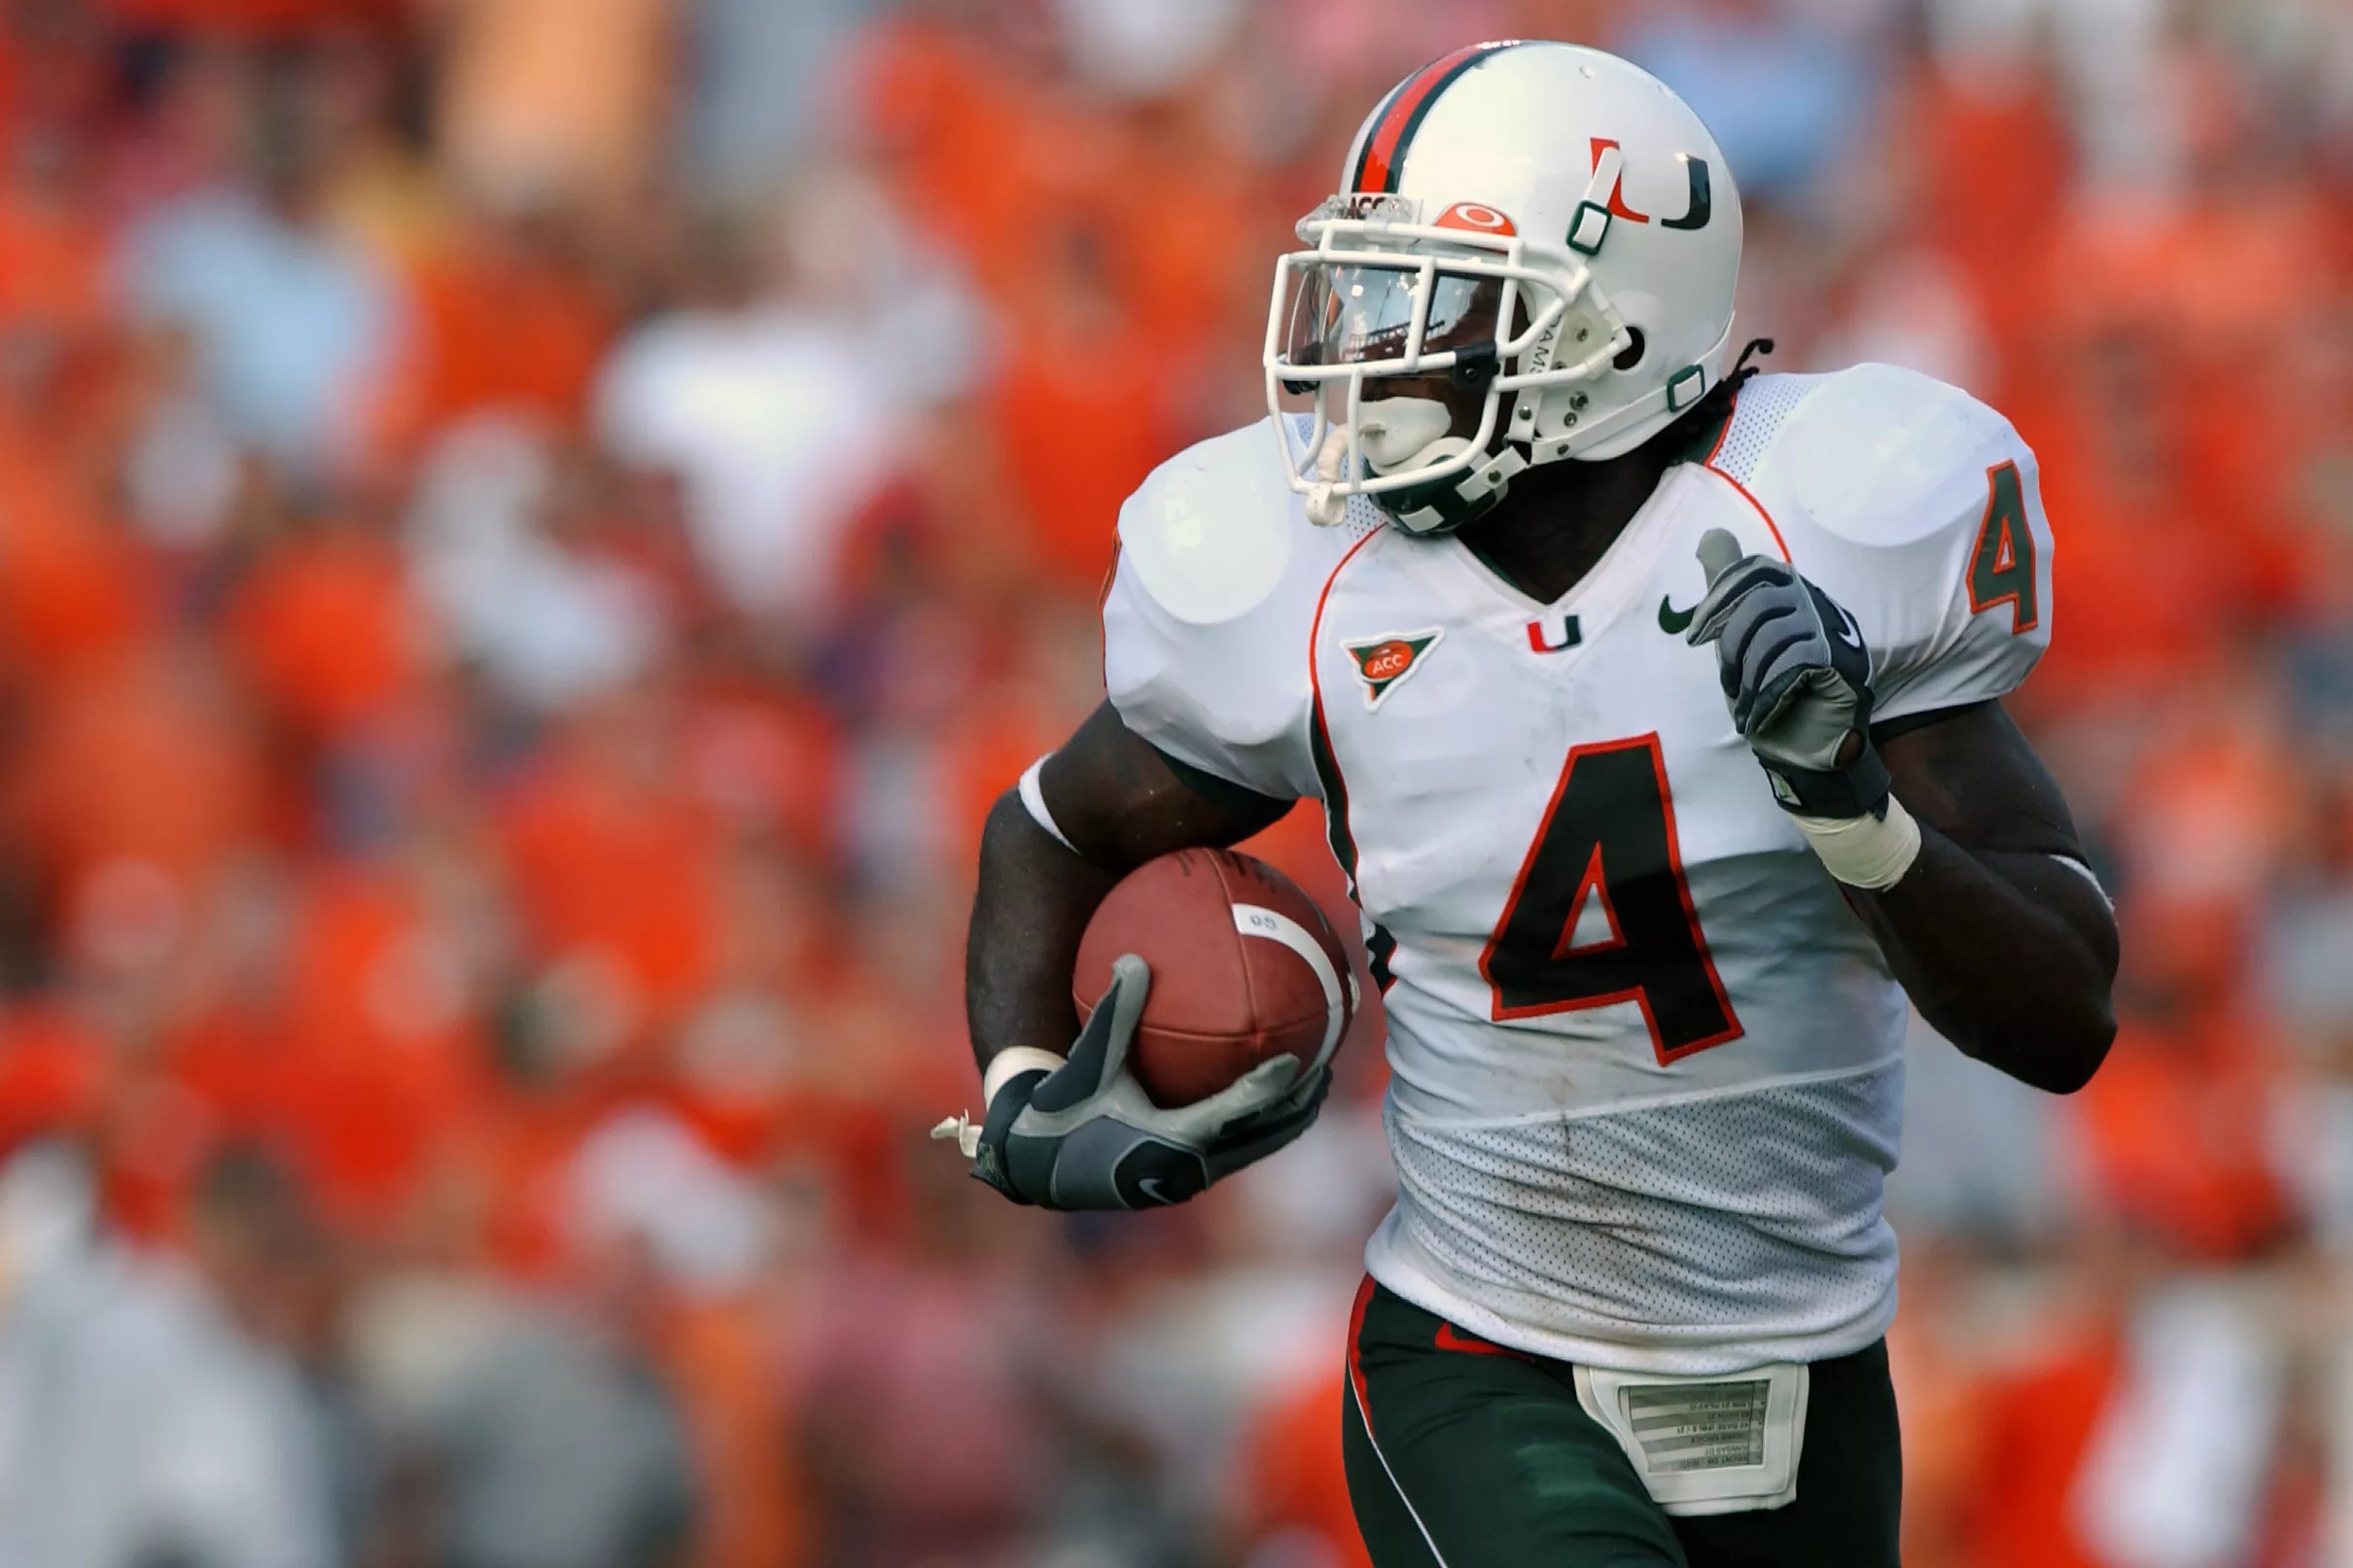 100 Greatest Plays in Miami History: #45 Devin Hester punt block return